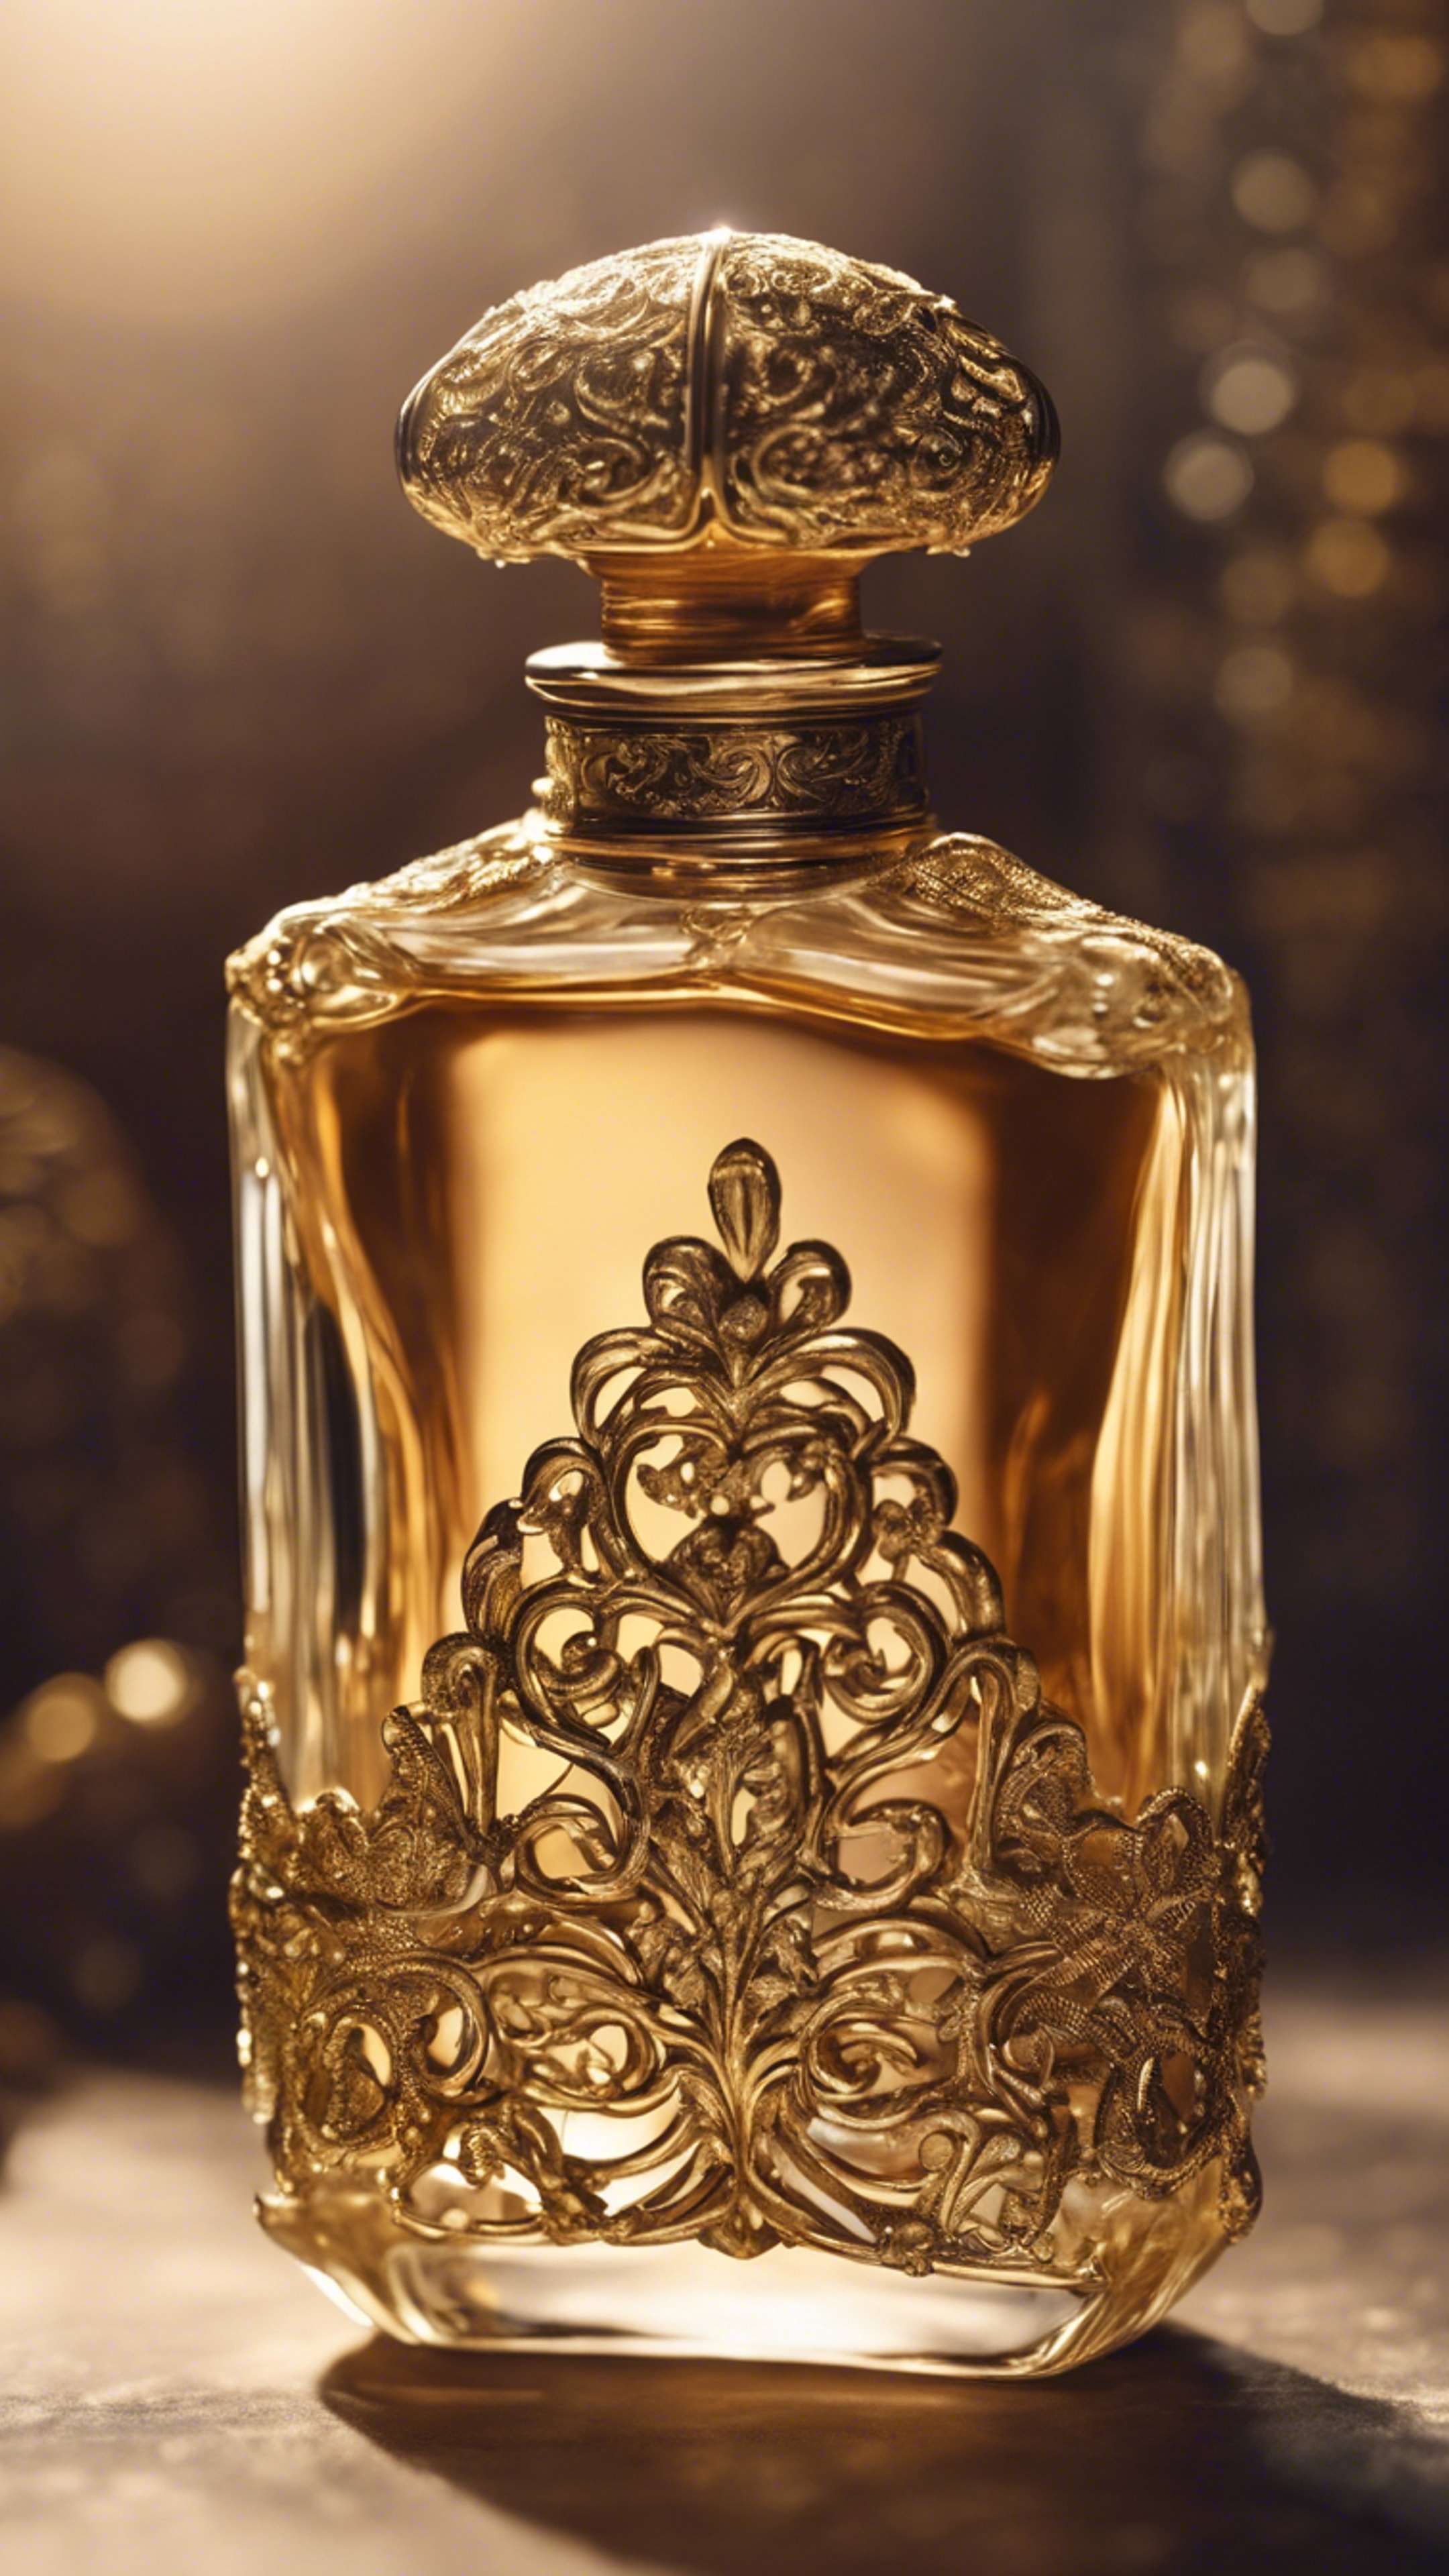 An antique perfume bottle with delicate gold filigree luxury cosmetic item. Tapet[fe361f22190a4891a6d9]